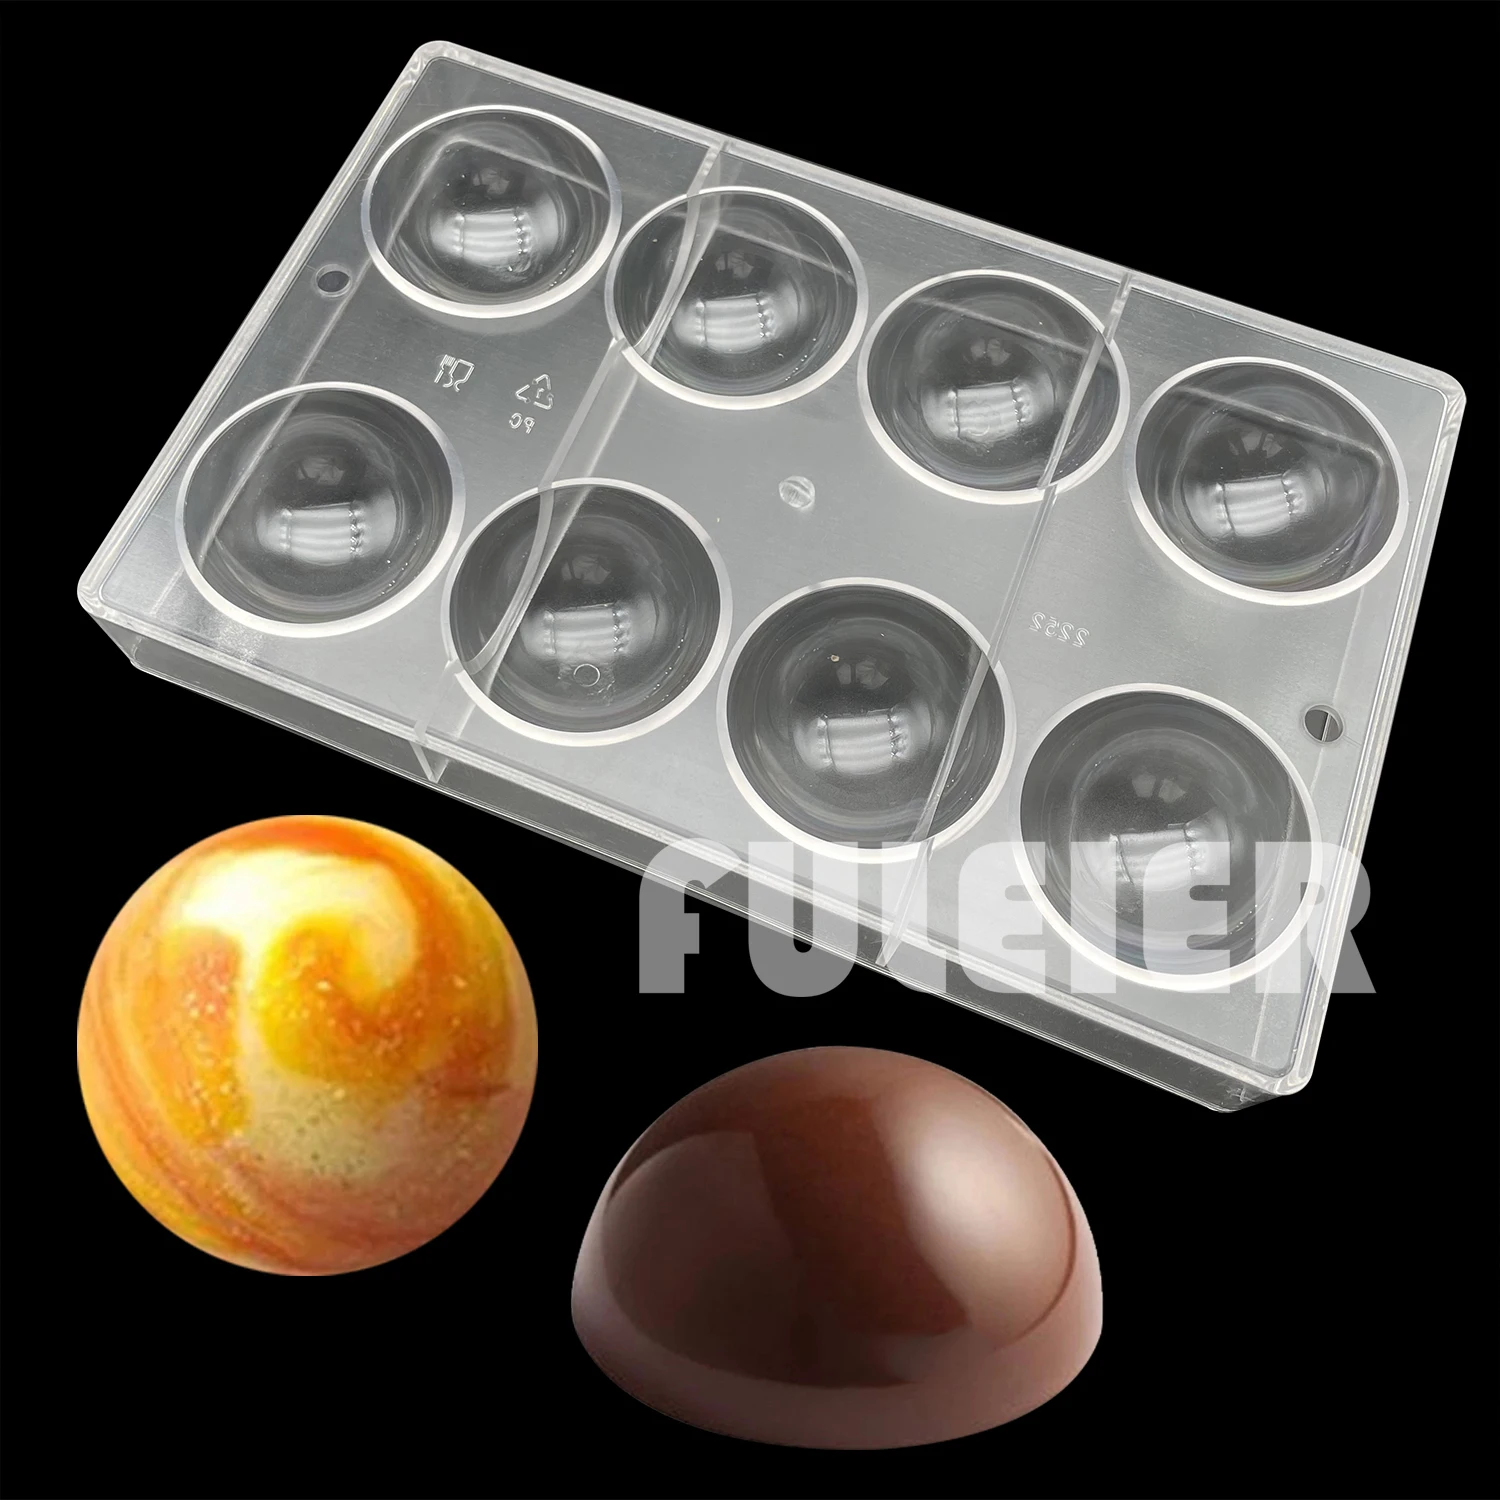 

8 Hole Half Ball Polycarbonate Chocolate Mold,DIY Baking Pastry Confectionery Tools Tray Candy Cake Decorating Mould Bakeware